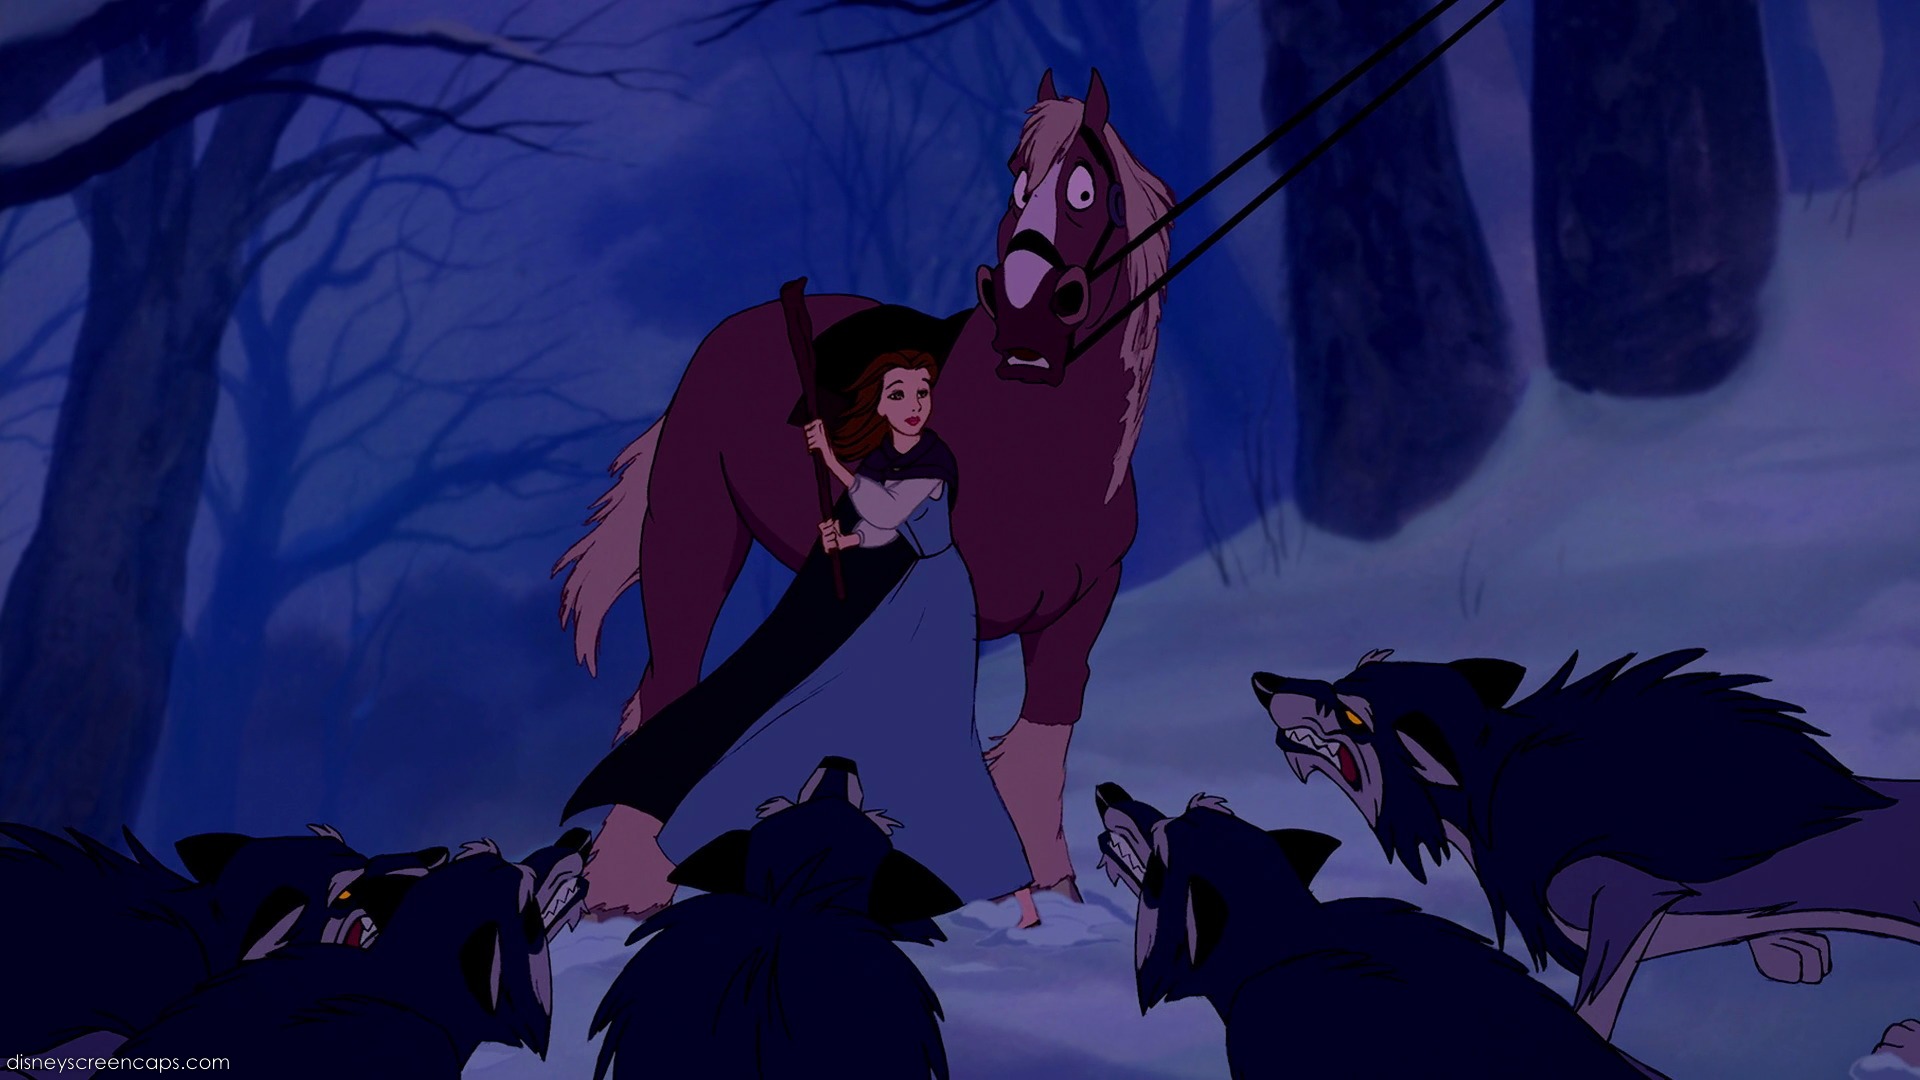 http://img1.wikia.nocookie.net/__cb20120105235000/disney/images/7/77/Belle-Wolves-(Beauty_and_the_Beast).jpg